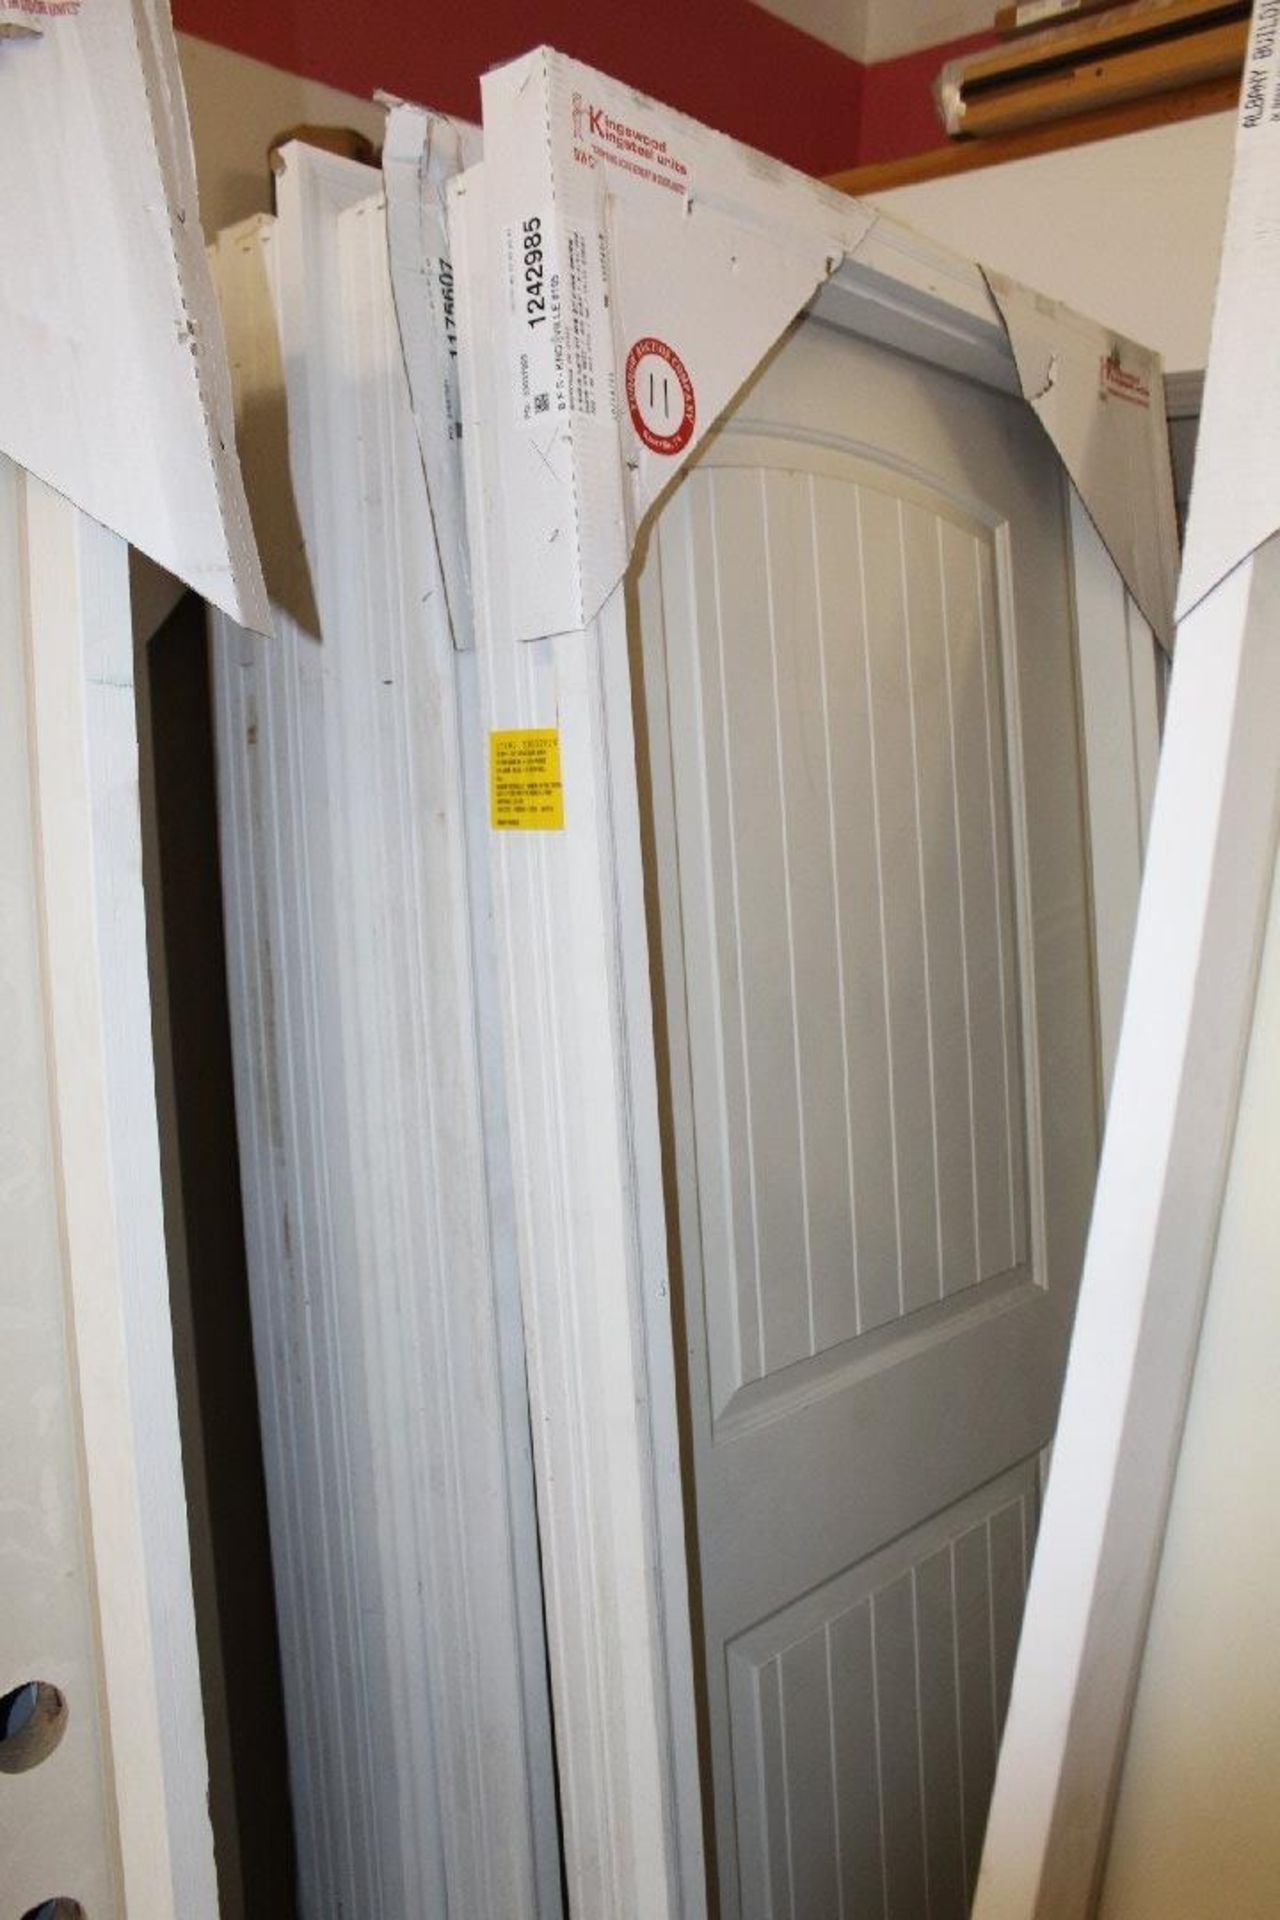 Kingswood 36 Inch Solid Core Transitional doors, Primed White, Quantity of 13 Left. LOCATION: 4313